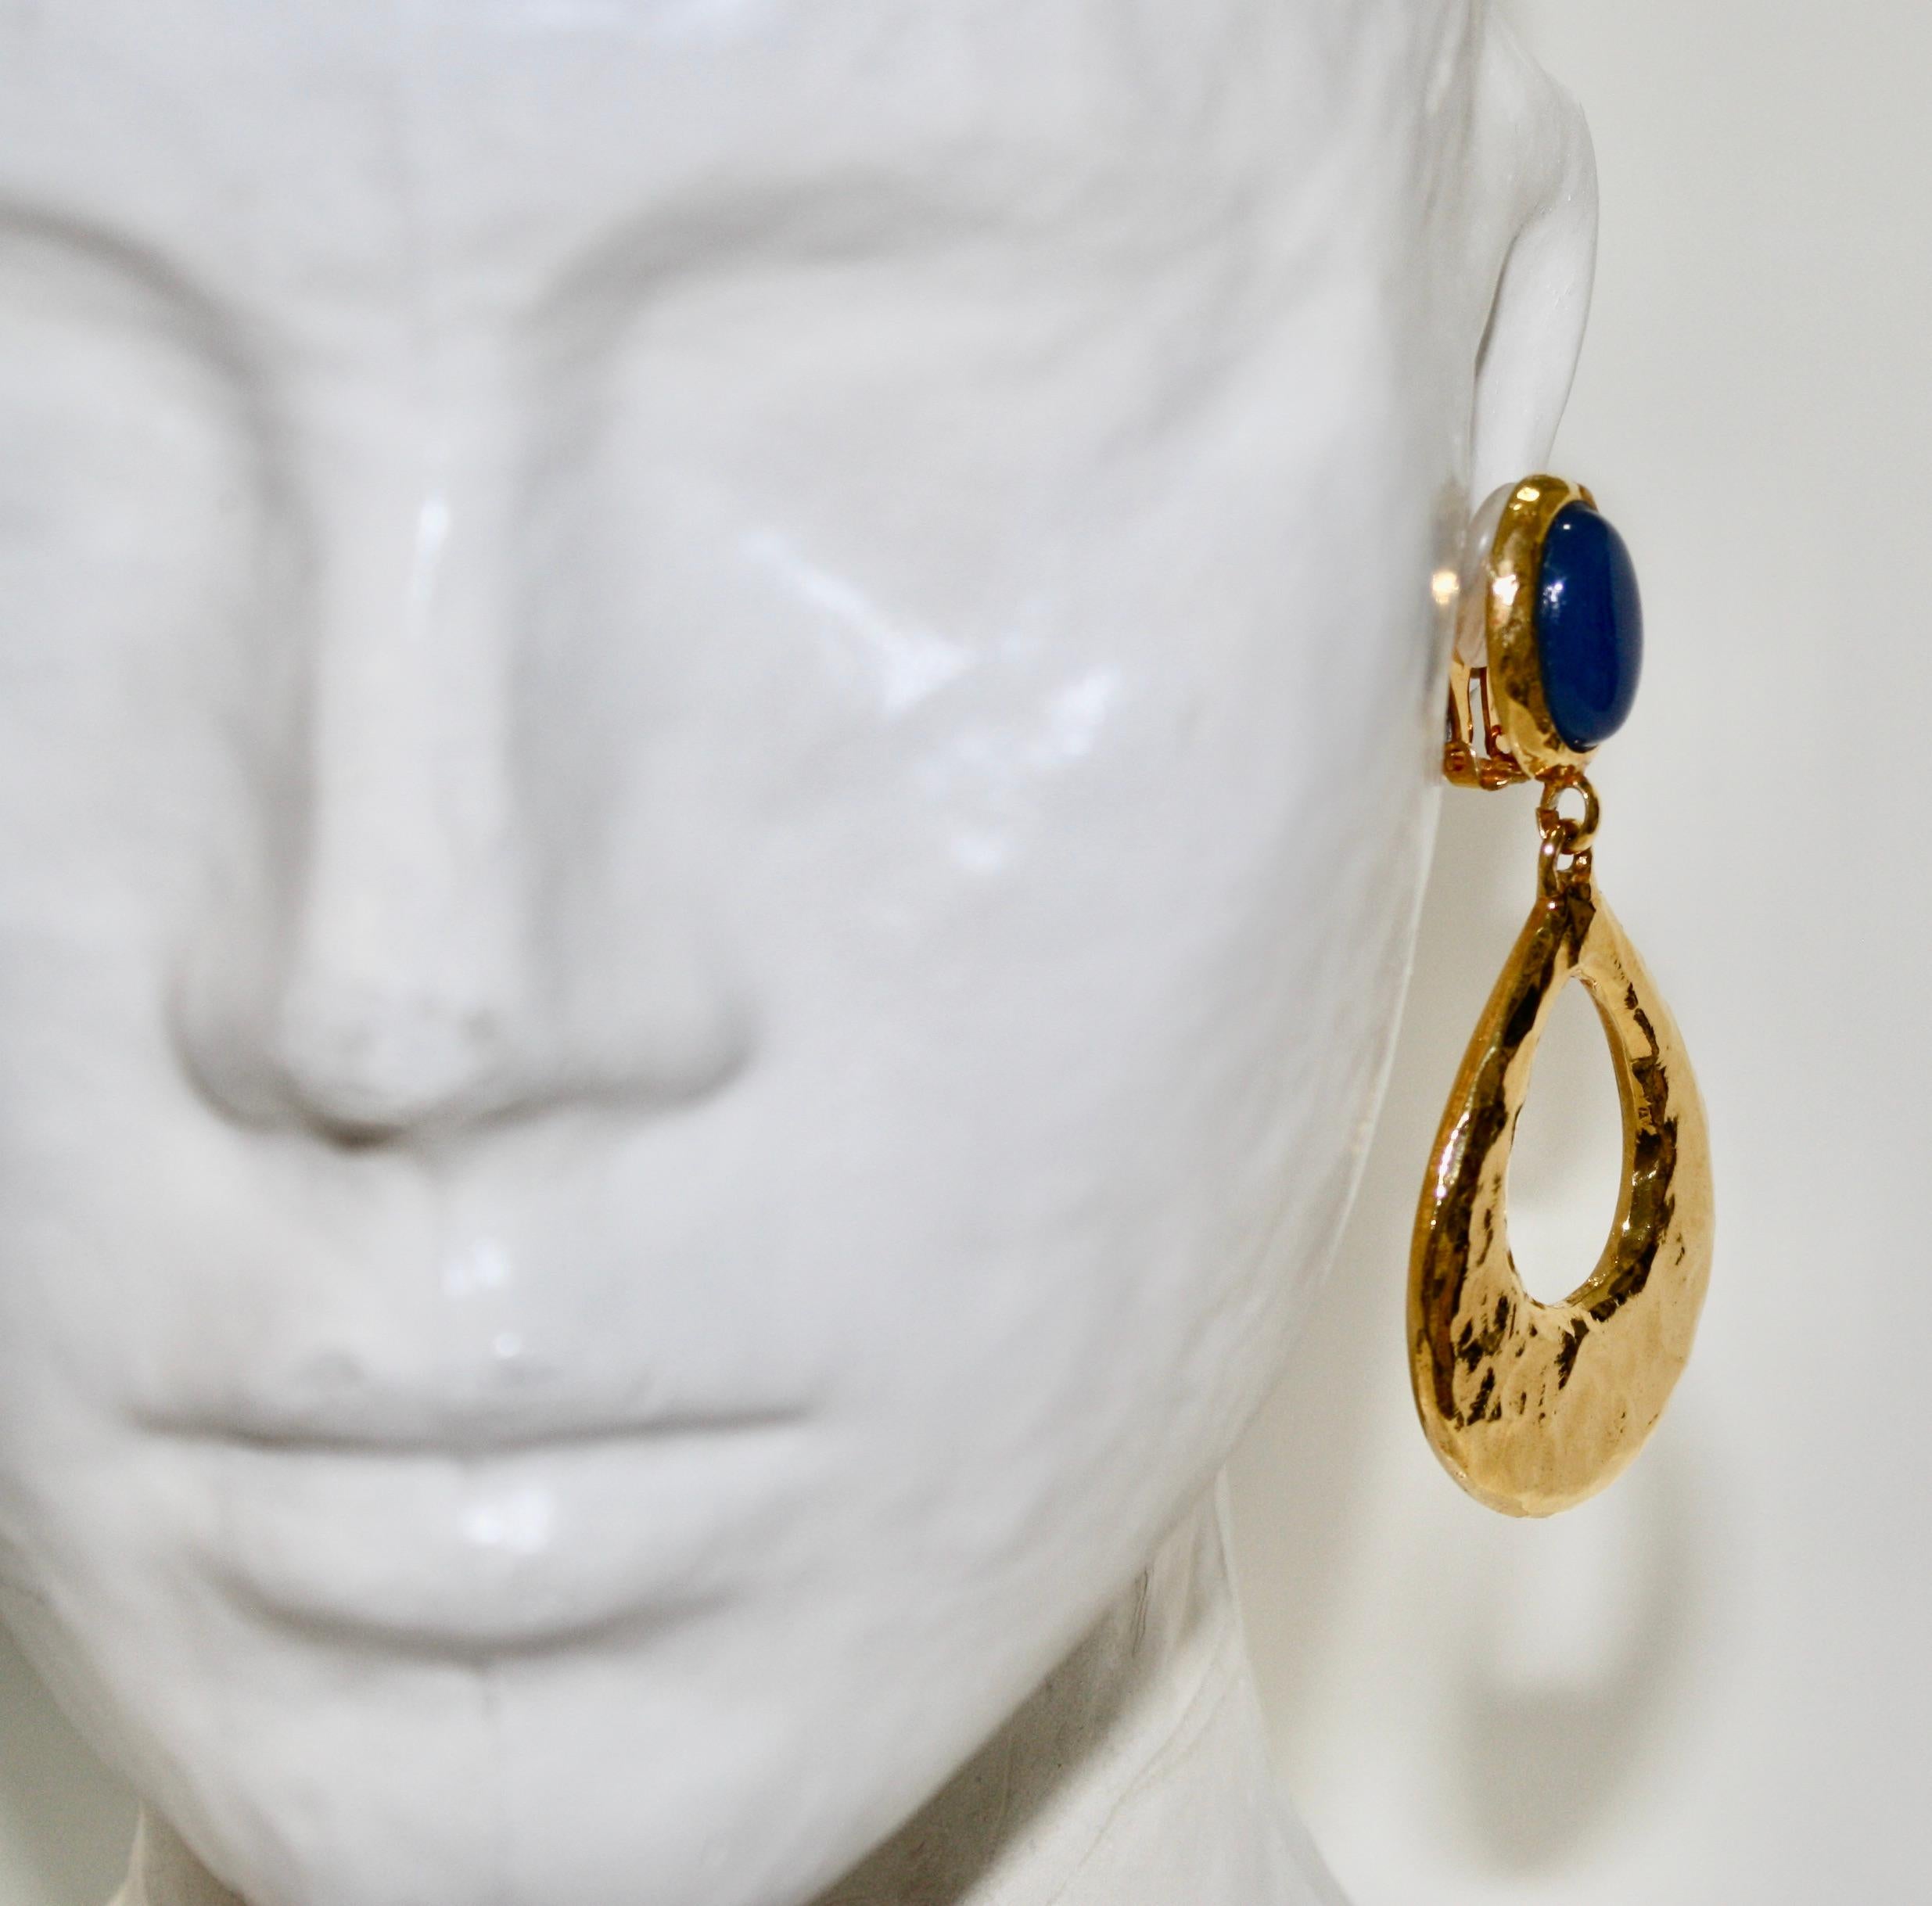 GEMS large clip earrings

A pair of earrings made of hammered golden metal and natural stone cabochons.
This pair of earrings with a vintage, colourful and shimmering look will affirm your style.
Philippe Ferrandis, French luxury designer. 
His